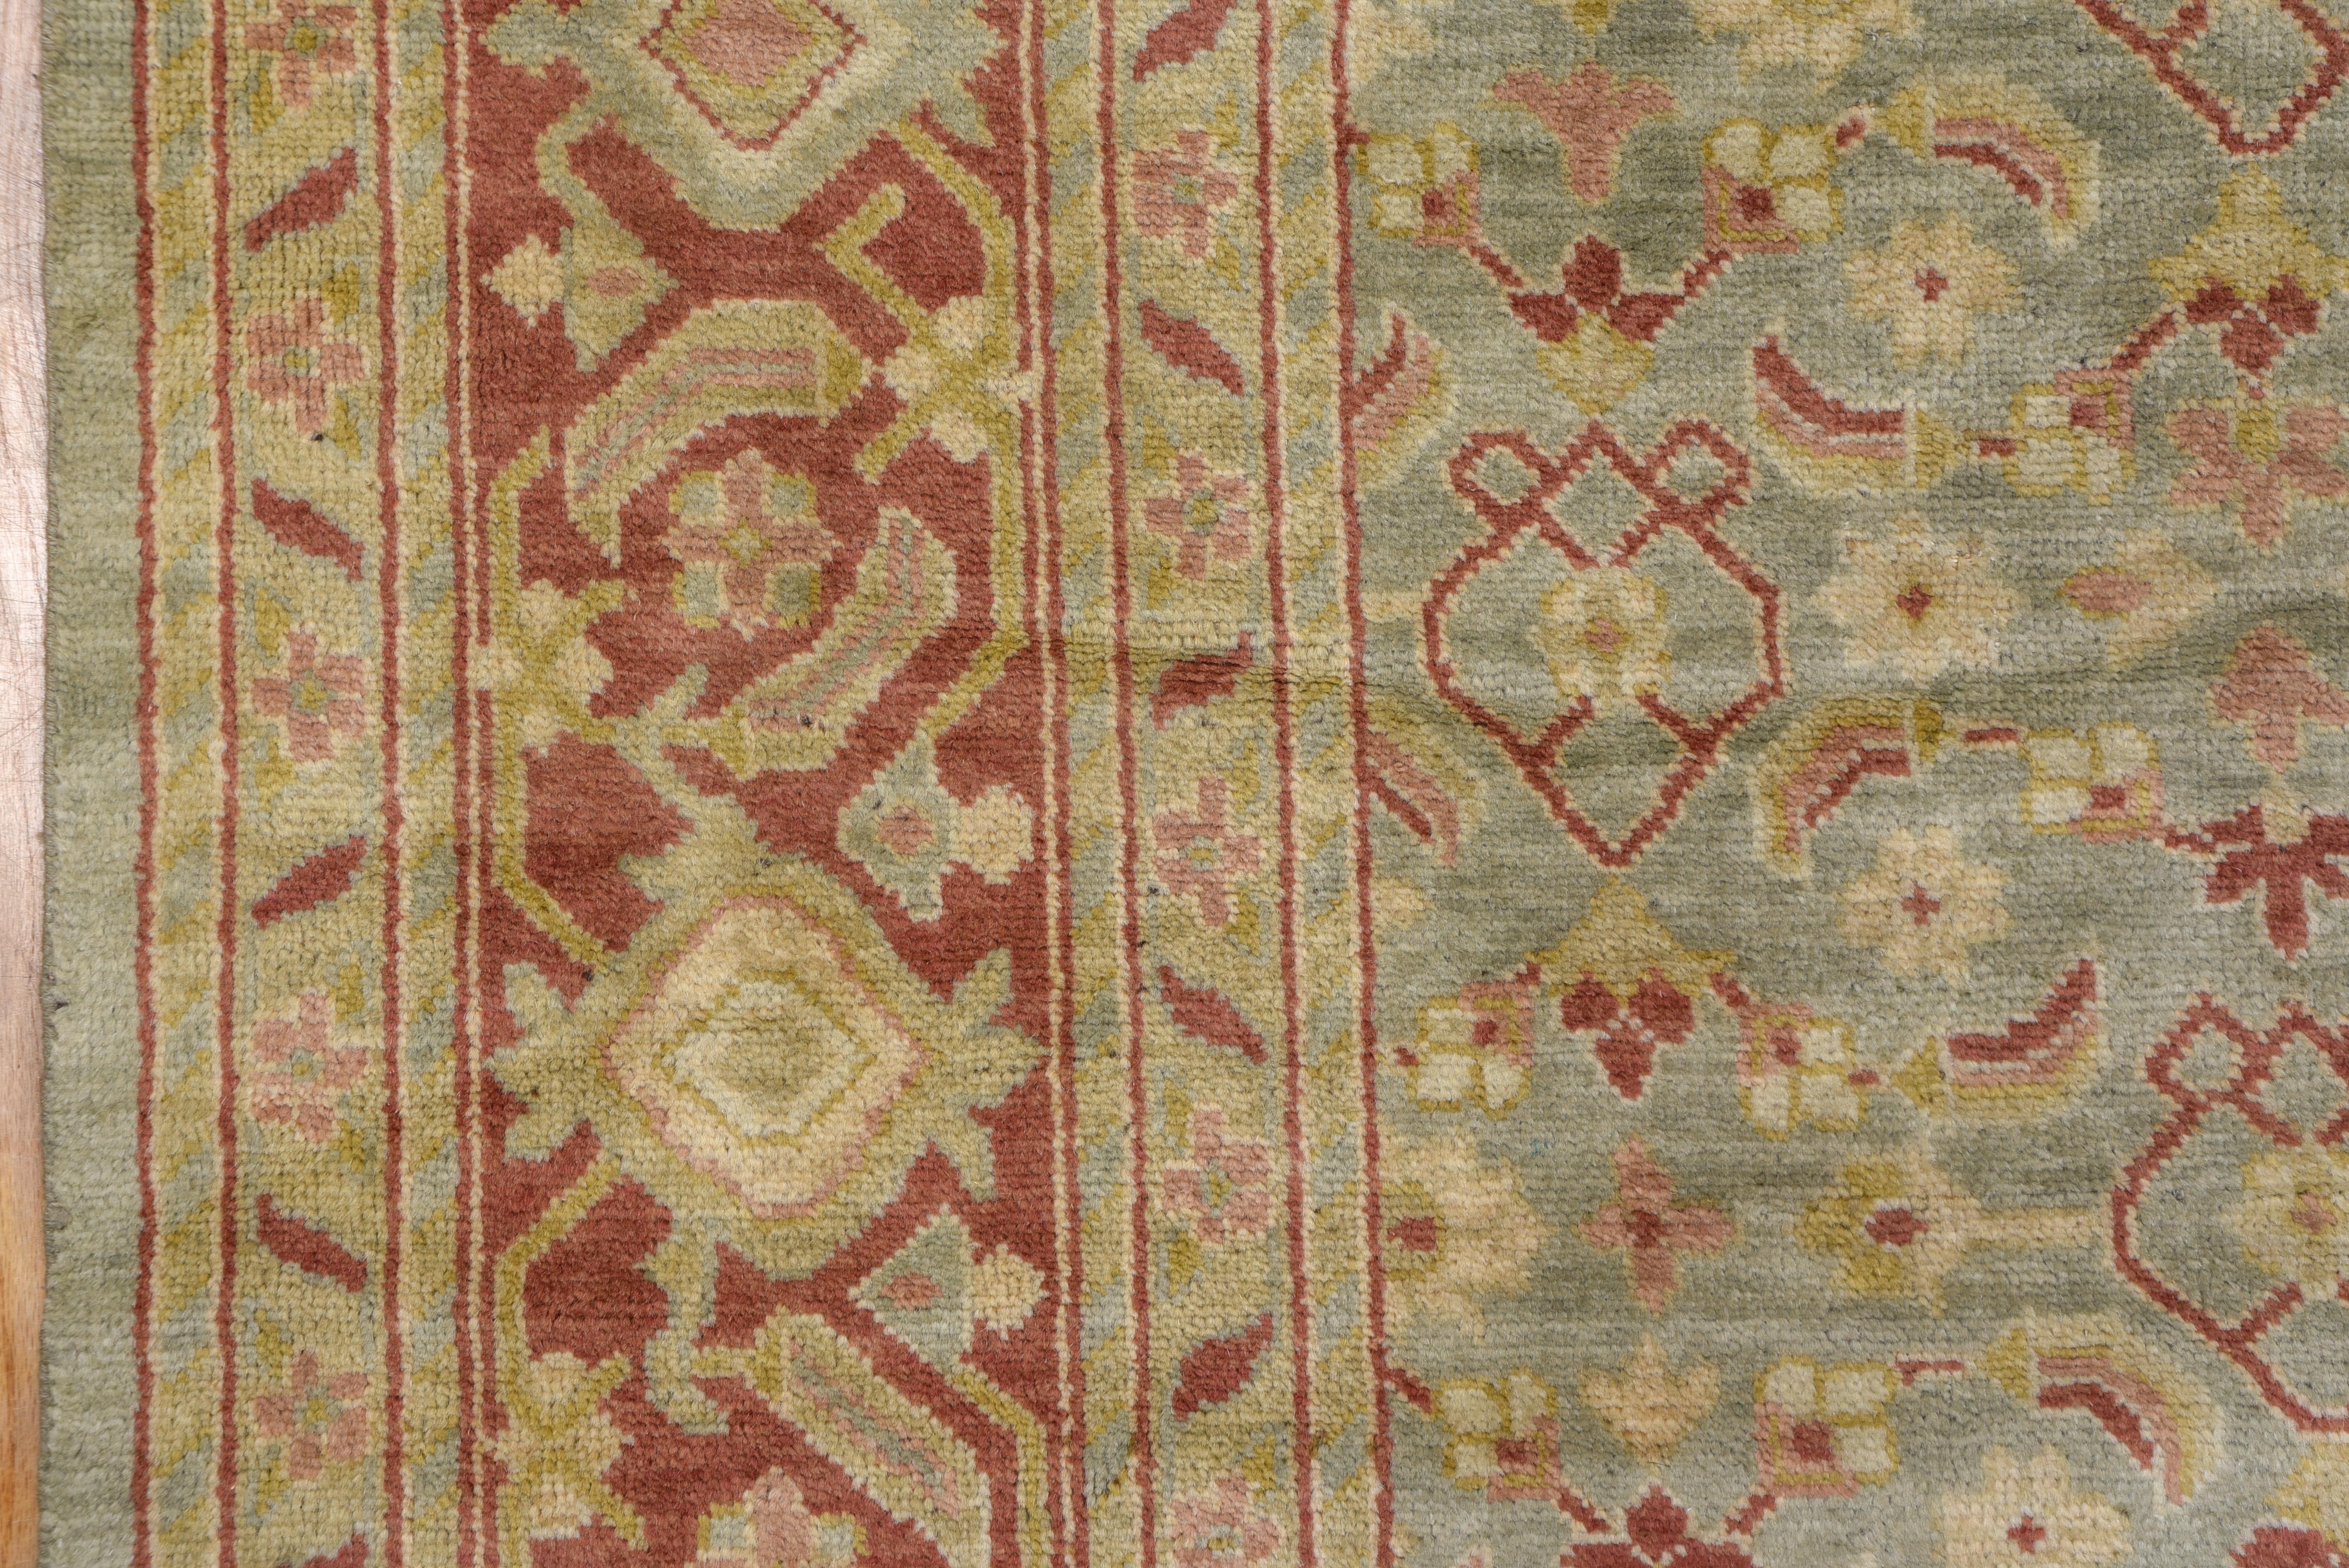 Hand Knotted Indian Mahal Design Carpet, Seafoam Colored Field, Red Borders 1